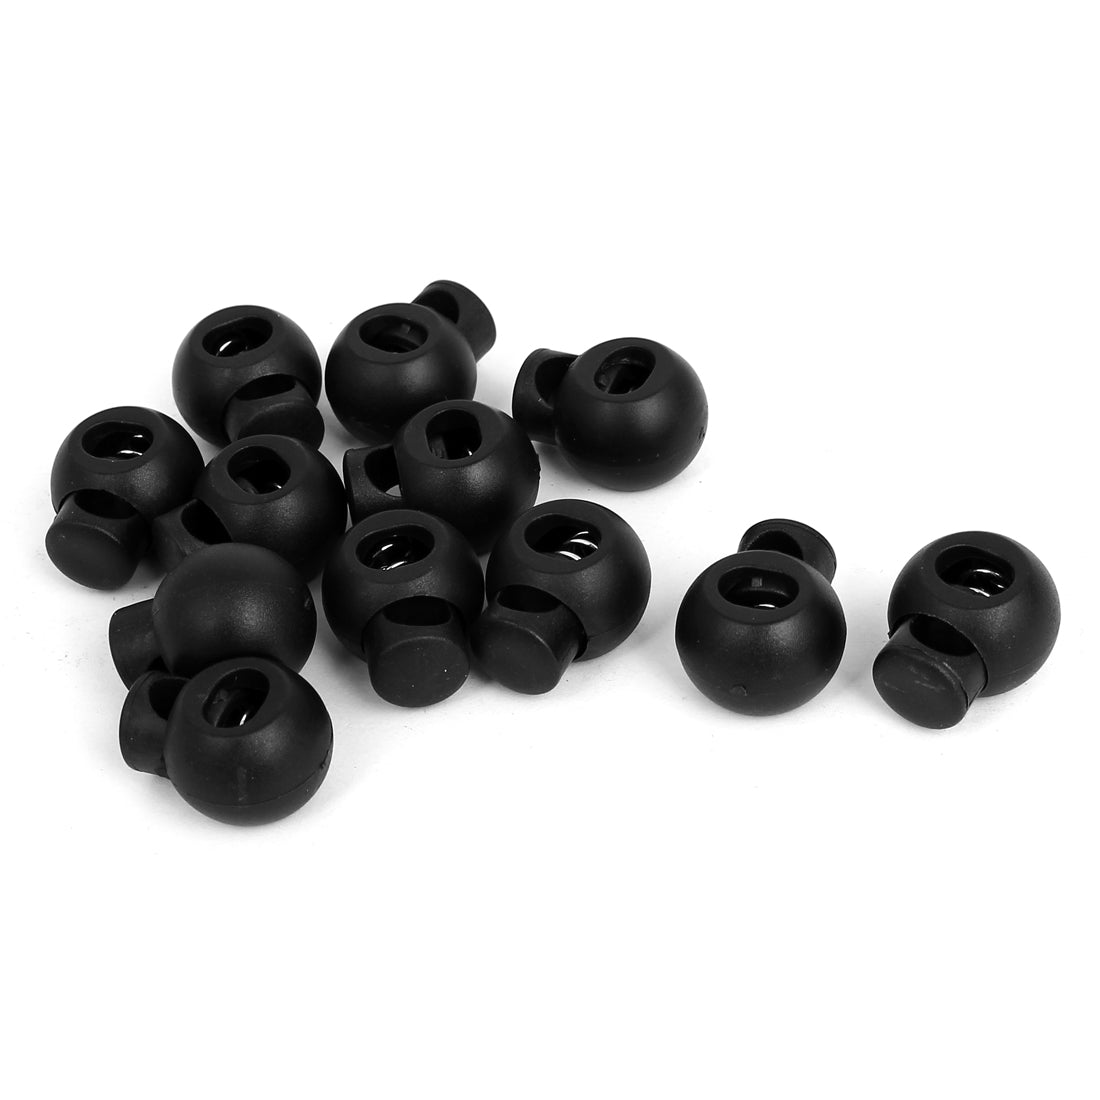 uxcell Uxcell Plastic Ball Shaped Spring Loaded Cord Lock Stopper Toggle End Black 12Pcs